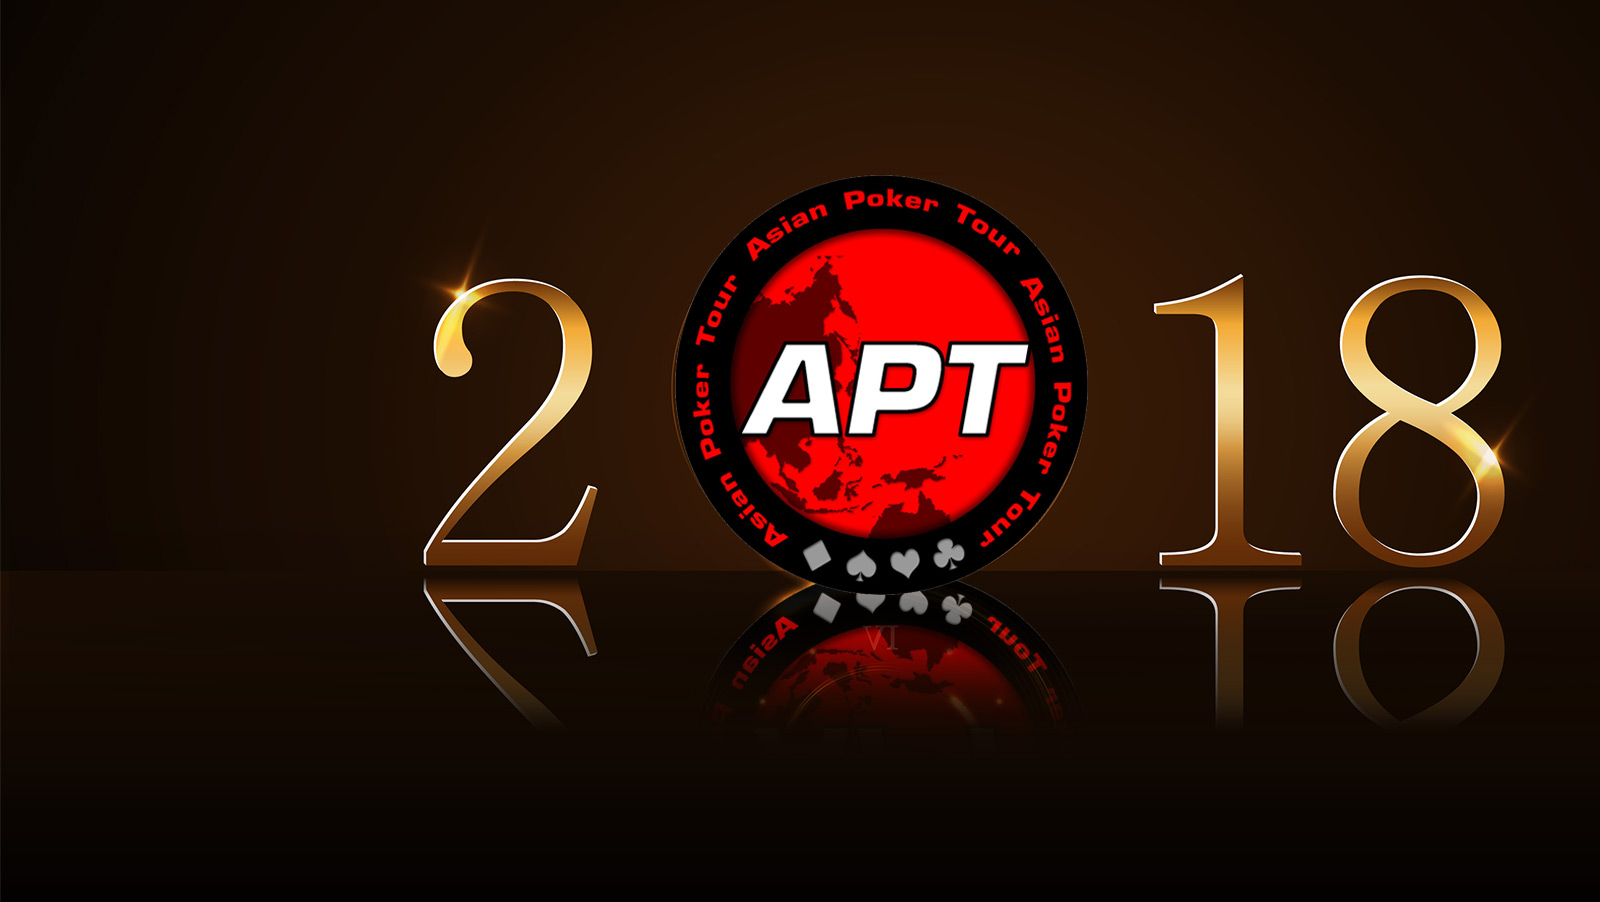 The Asian Poker Tour in 2018